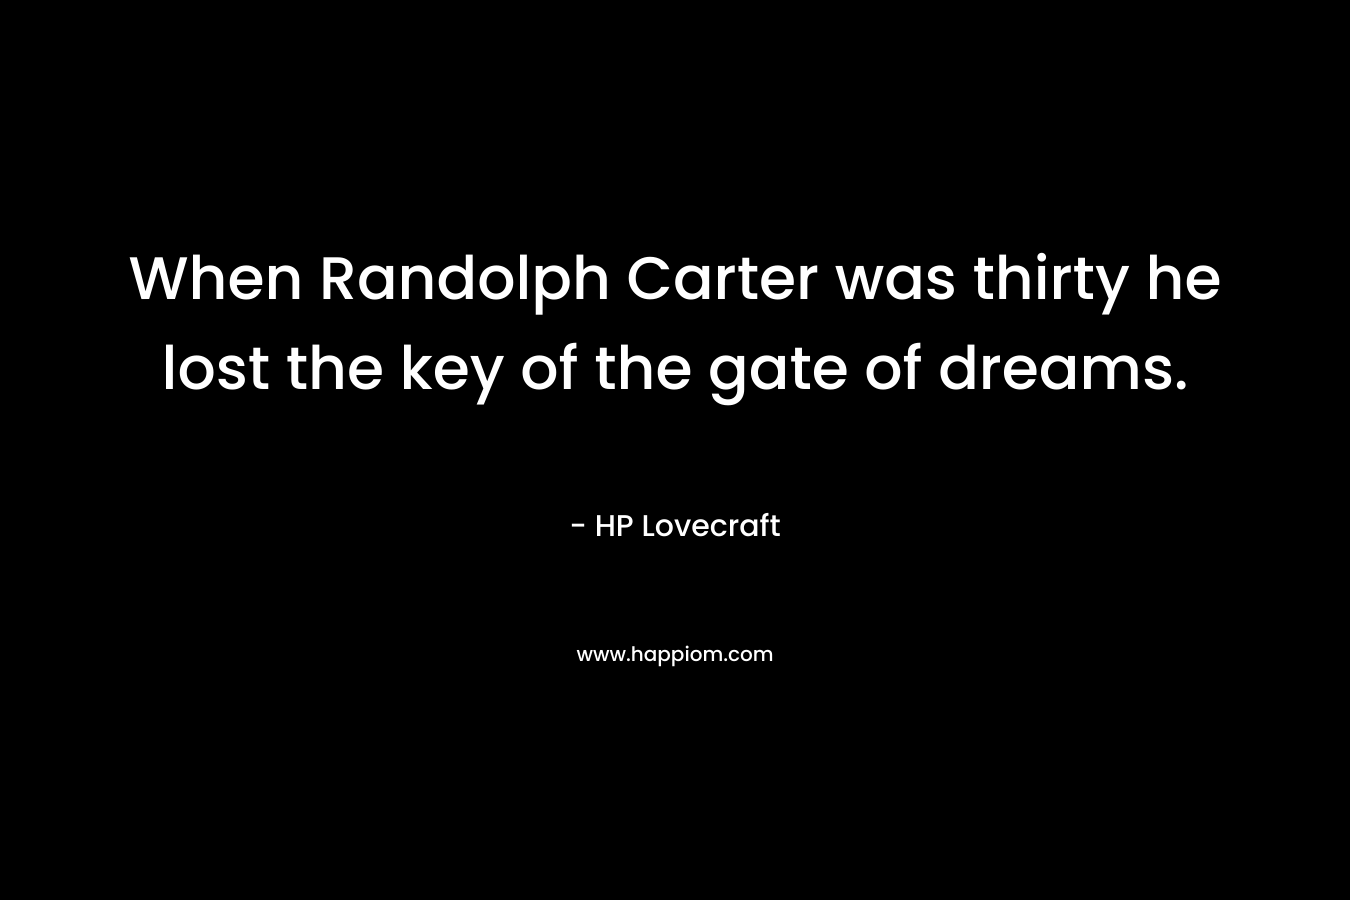 When Randolph Carter was thirty he lost the key of the gate of dreams. – HP Lovecraft